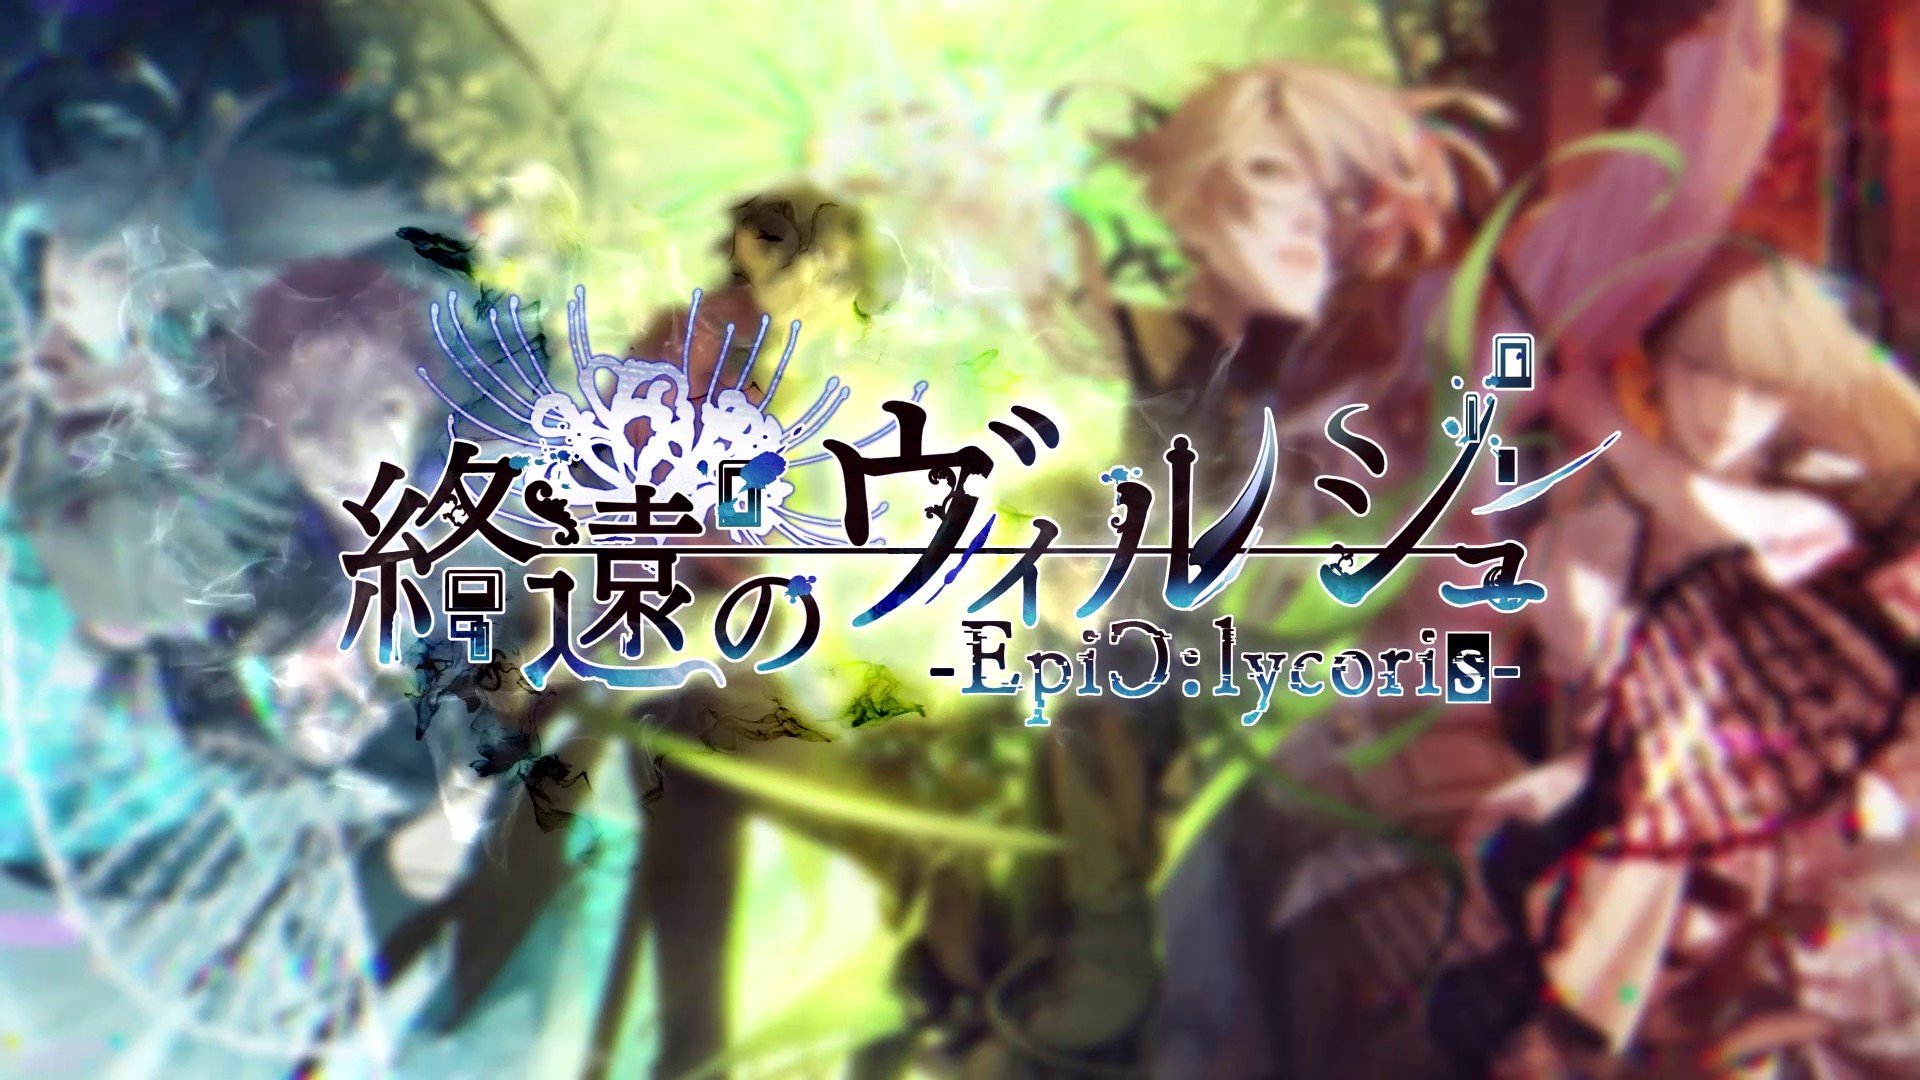 #
      Virche Evermore: -EpiC:lycoris- coming west this fall